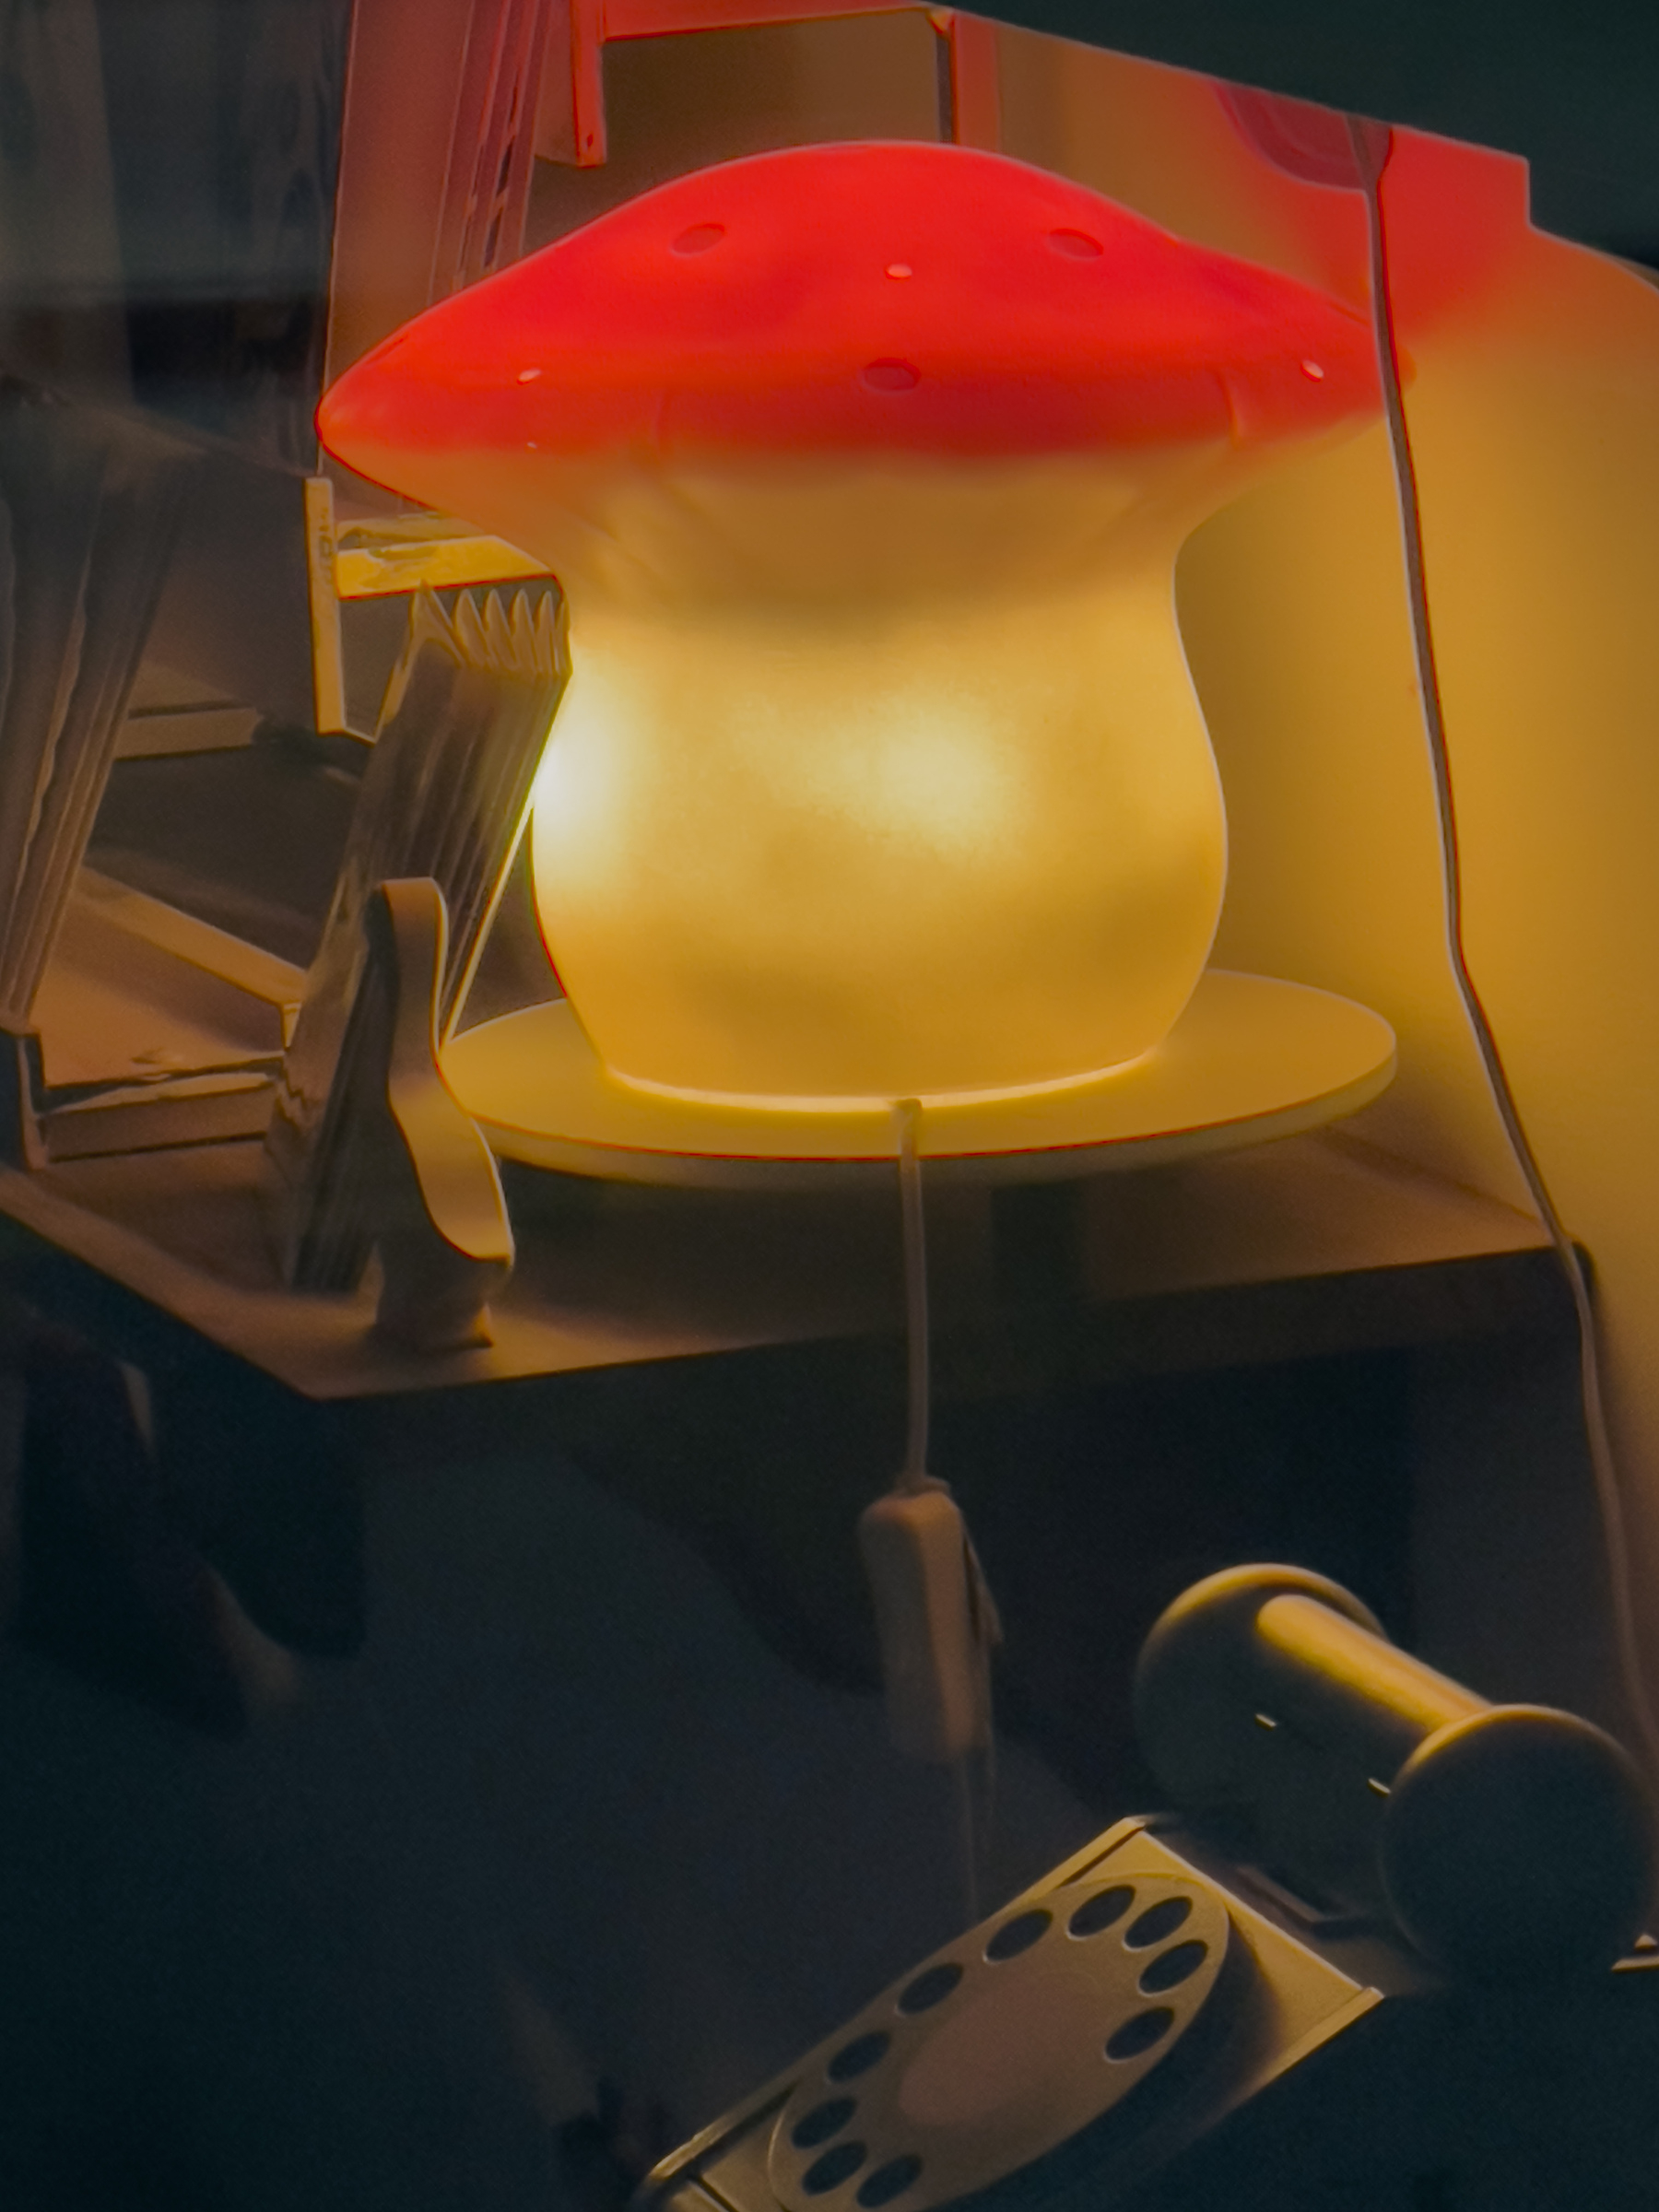 Mushroom lamp in store. Wooden child’s rotary telephone in foreground.